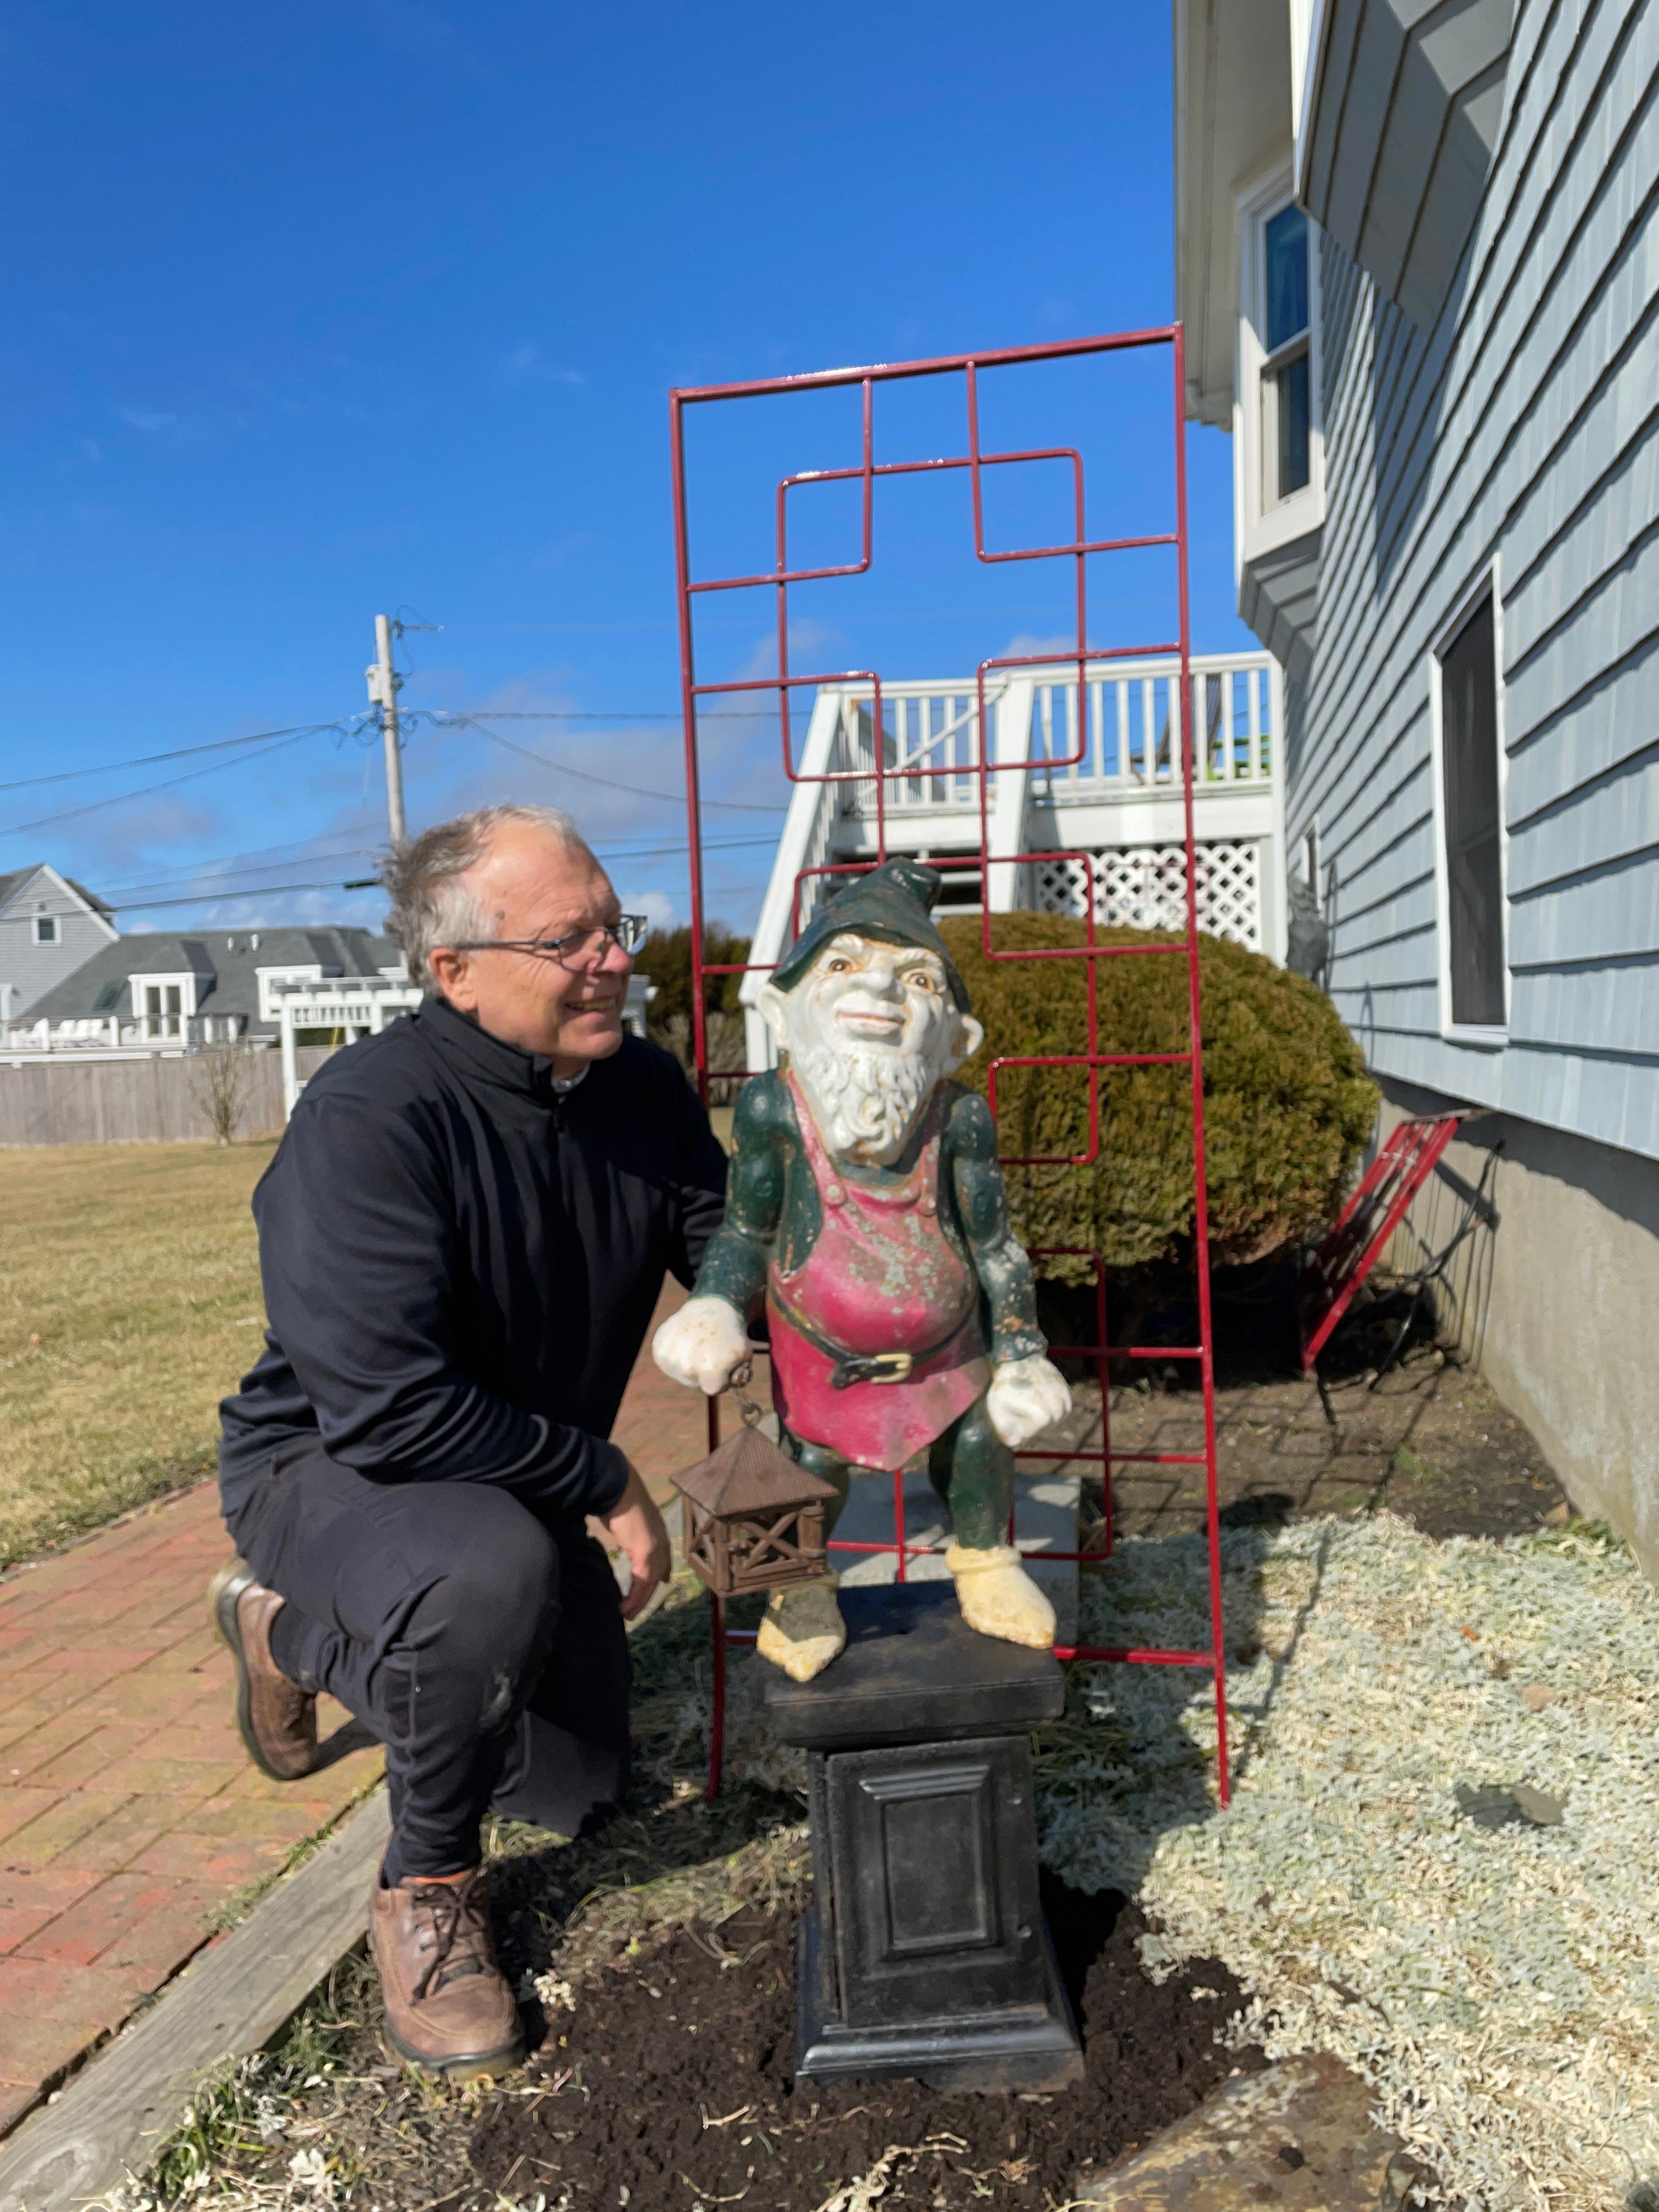 Giant 44 inch legendary American Garden Protector

America's friendly gnome 

Since the early 20th century, American gardeners have been infatuated with these loveable garden gnomes.
No wonder why- legend tells us they protect gardens and bring